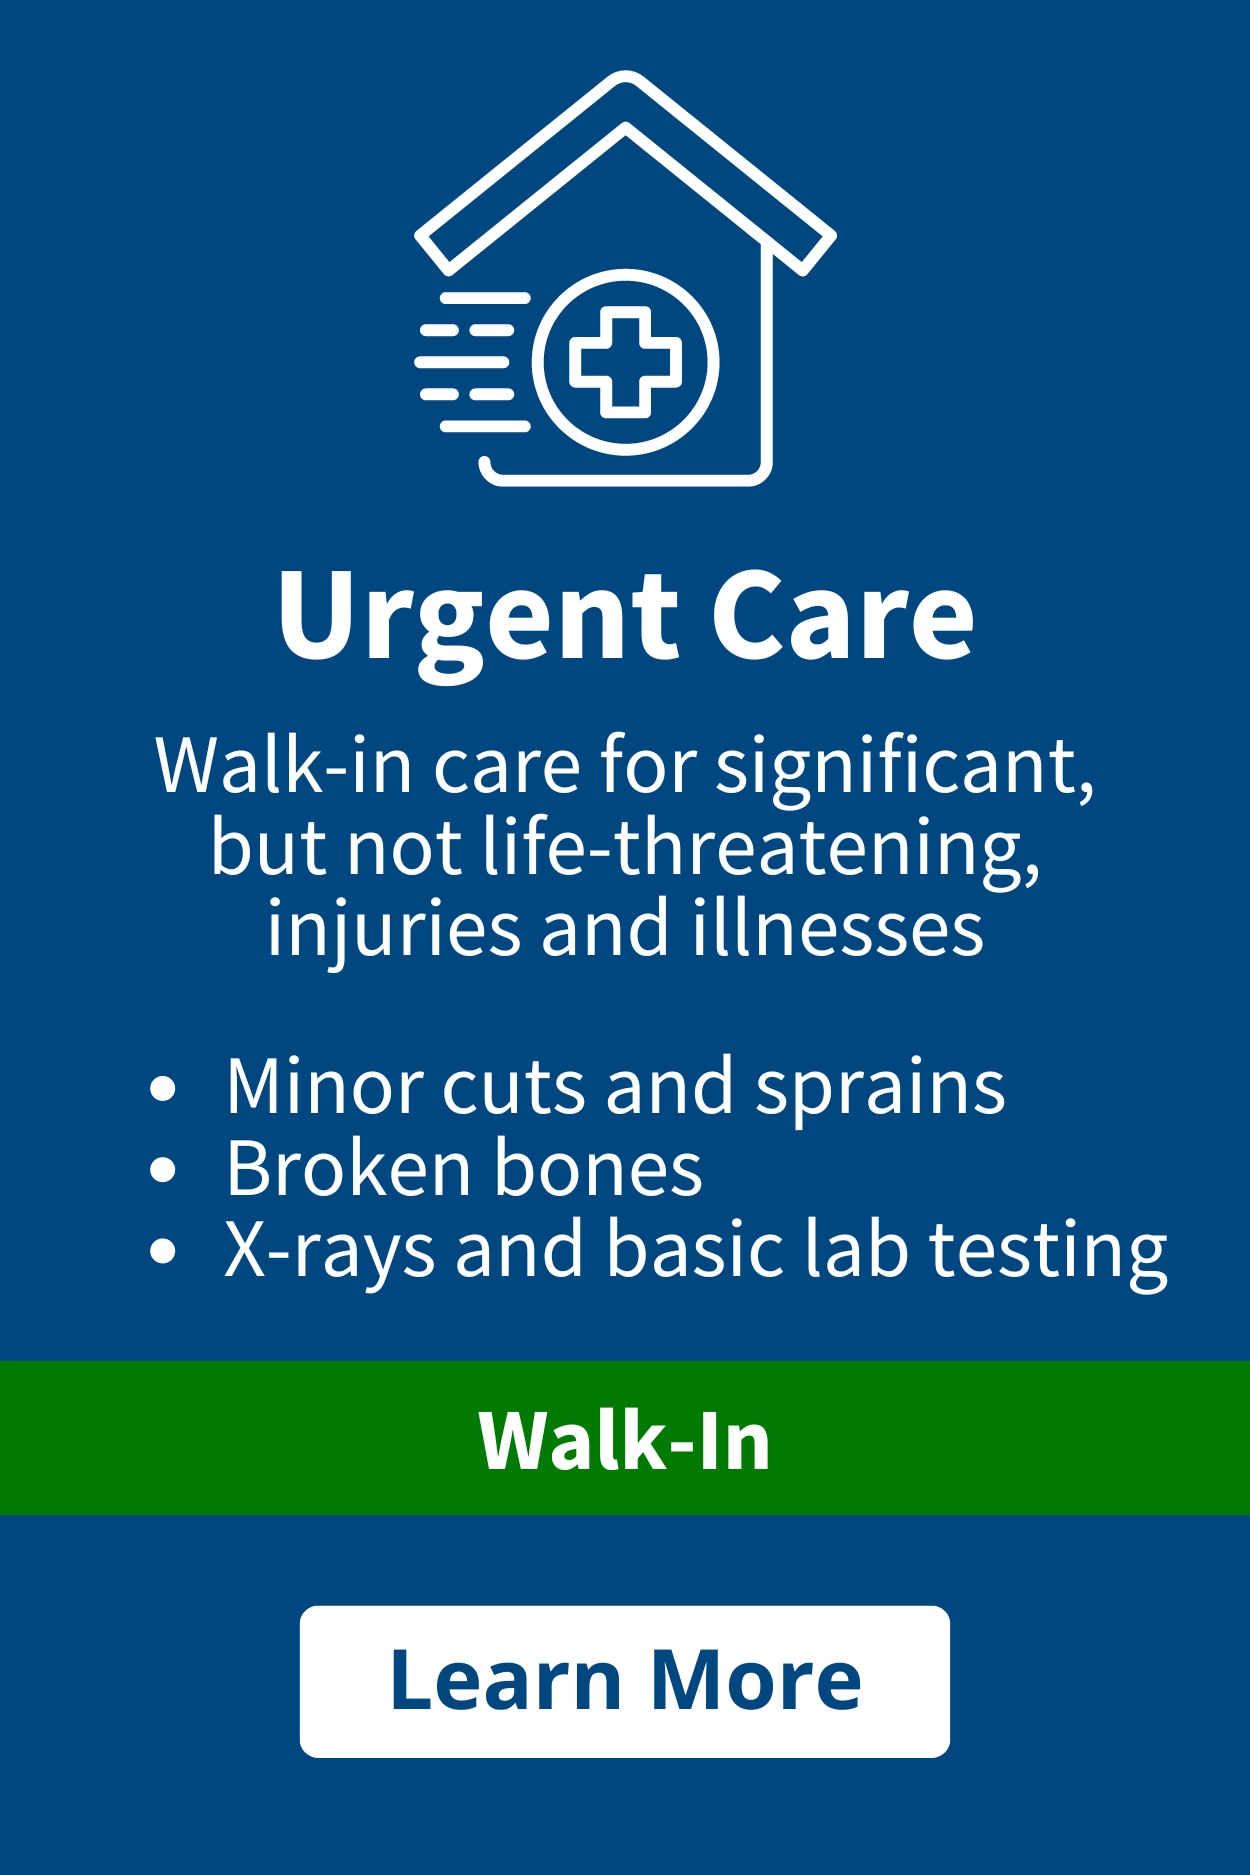 Blue graphic with text reading "Urgent Care. Walk-in care for significant, but not life threatening, injuries and illnesses." Bullet points read: "Minor cuts and sprains, broken bones, x-rays and basic lab testing." Light blue bar reads "Walk-In." Button reads "Learn More"